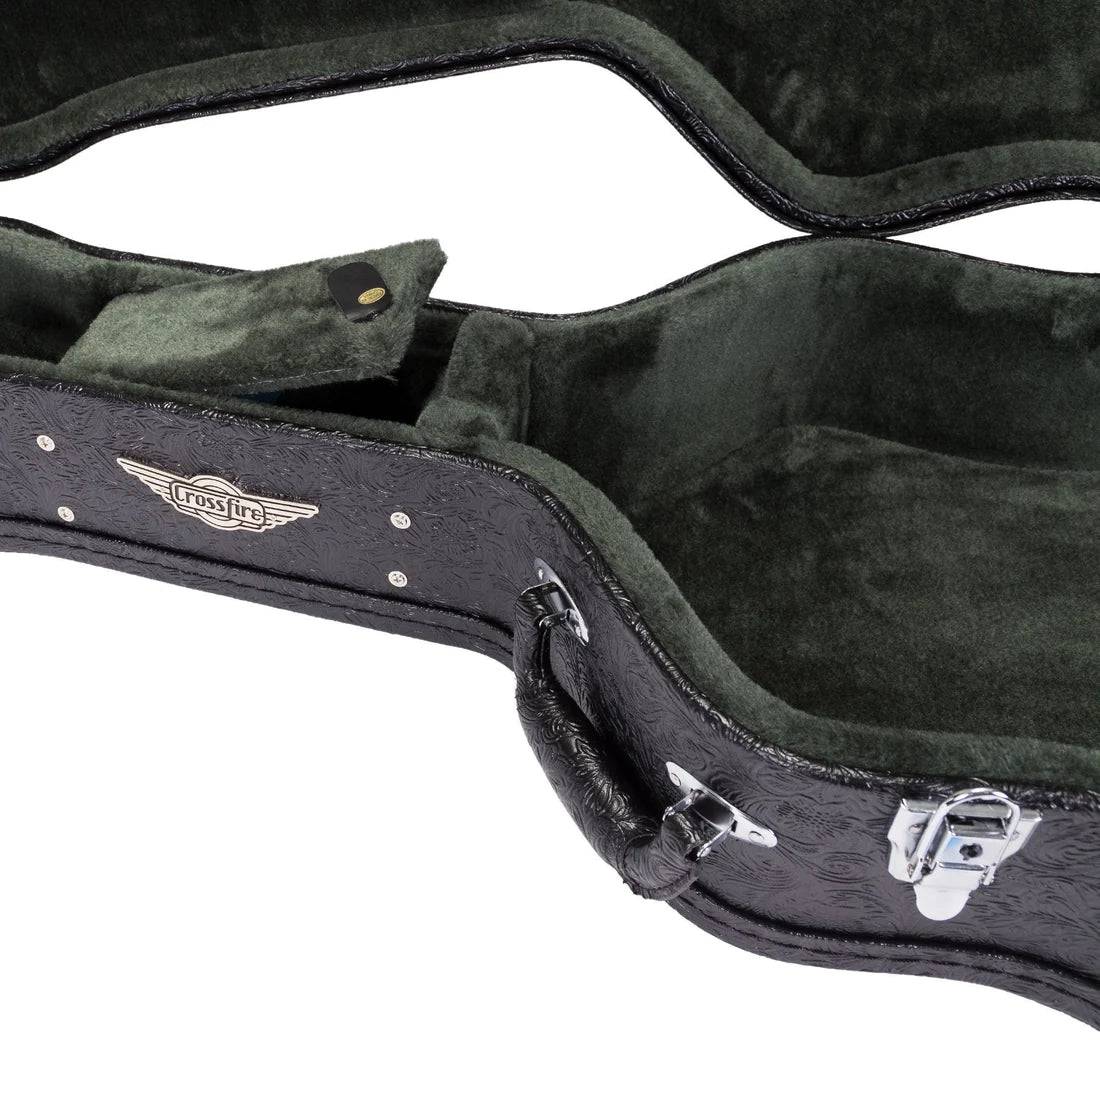 Crossfire Deluxe Paisley 12-String/Acoustic Guitar Hard Case - Joondalup Music Centre